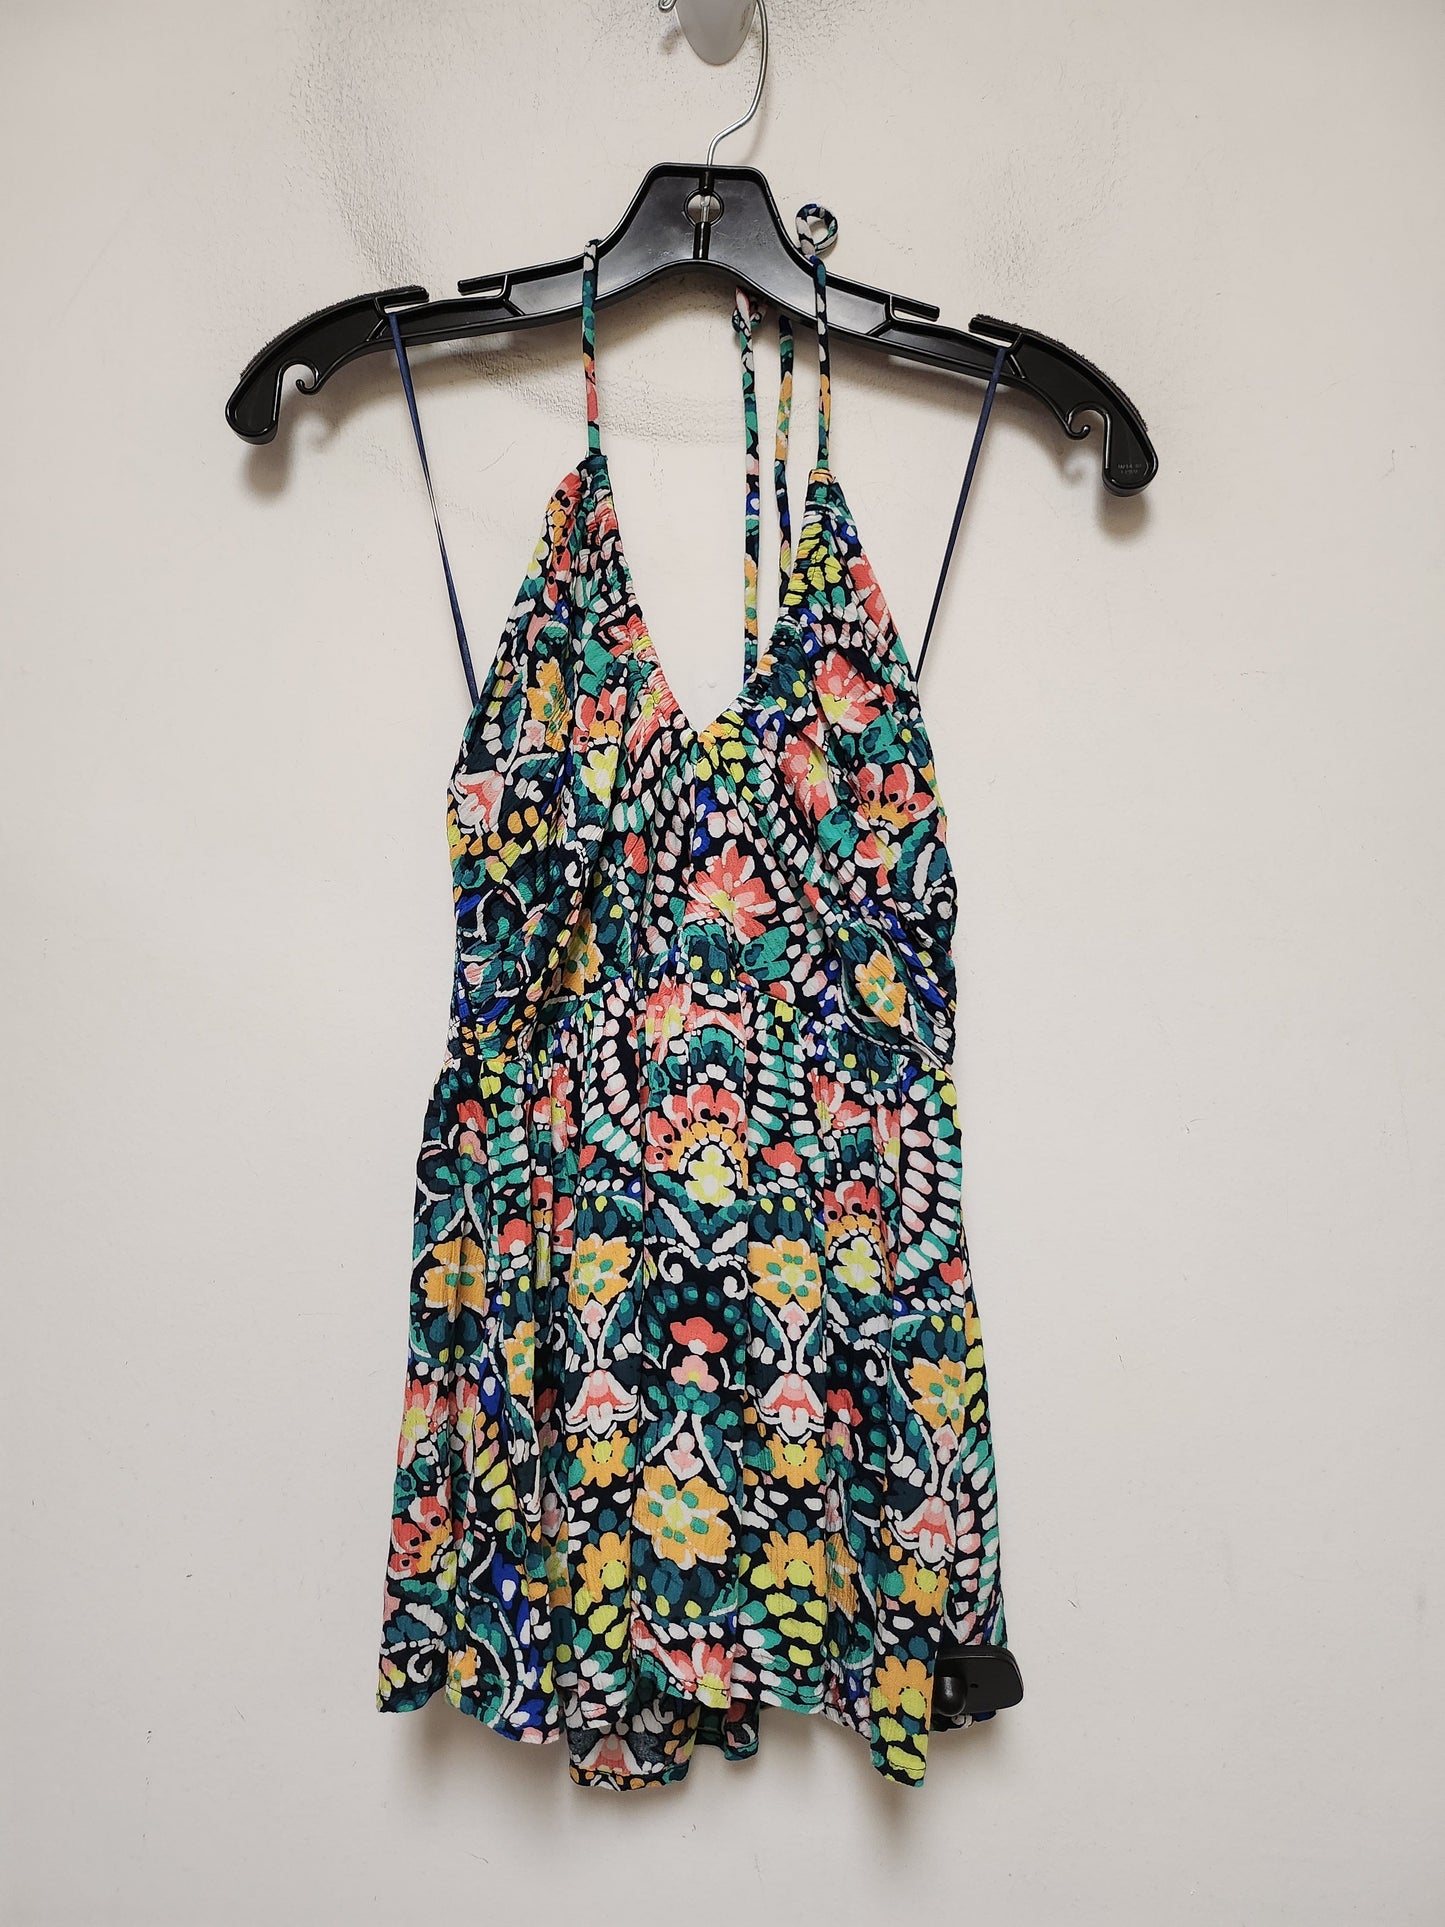 Floral Print Top Sleeveless Old Navy, Size S